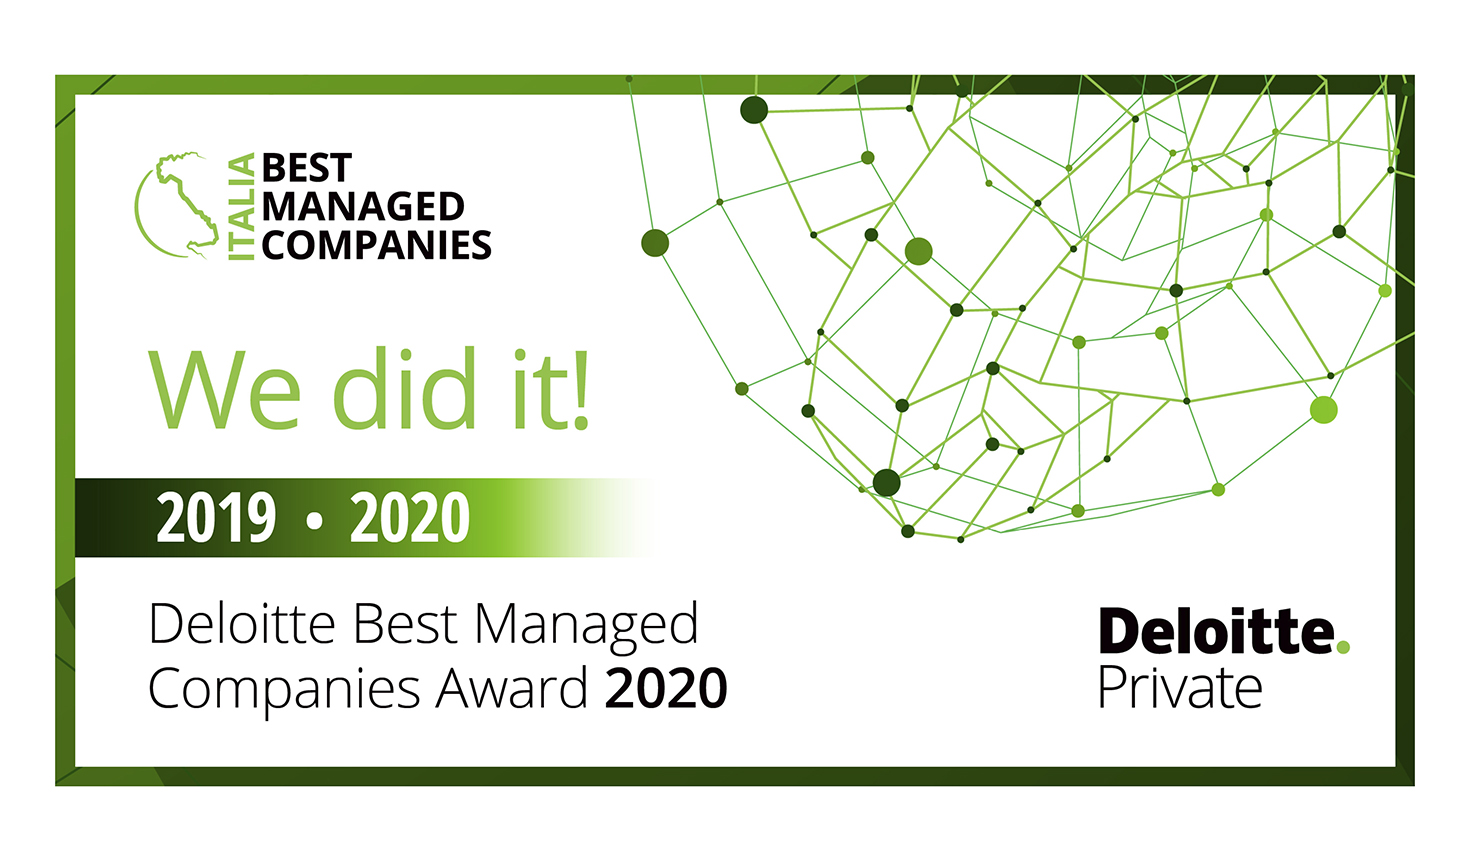 GIORGETTI WINS THE “BEST MANAGED COMPANY” ALSO IN 2020 1